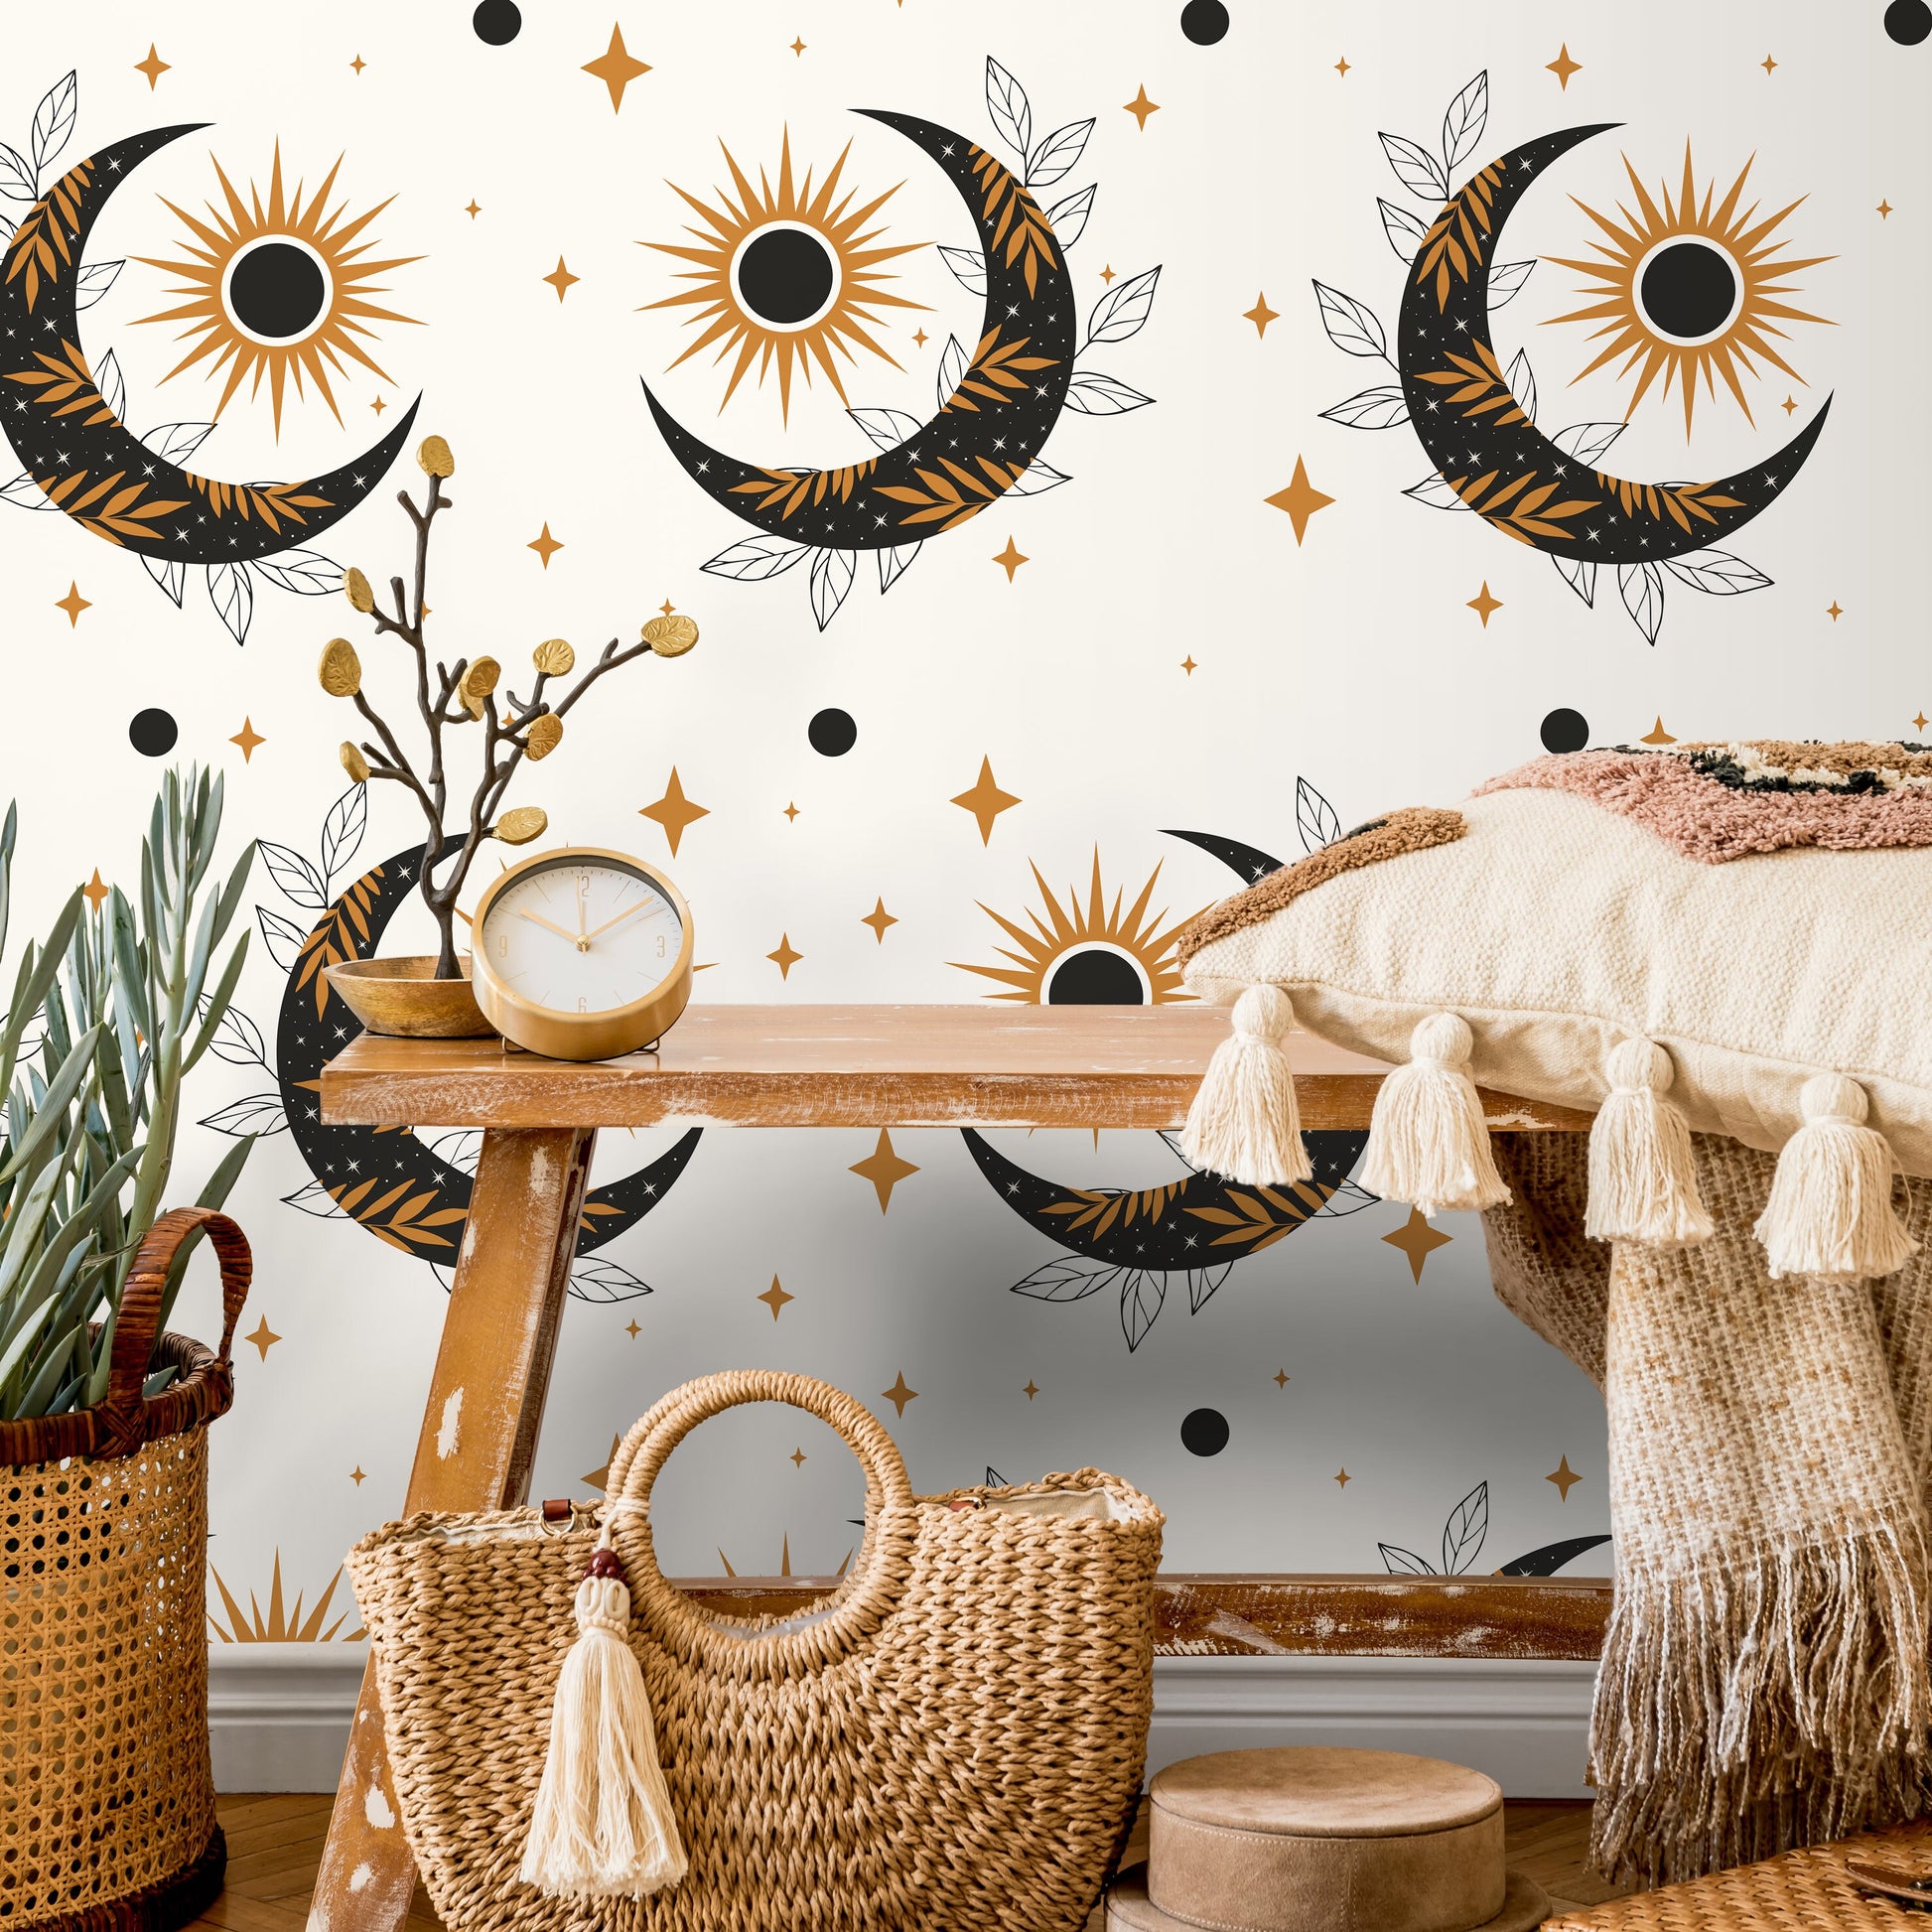 Mystique and Celestial Wallpaper Removable Peel and Stick Wallpaper, Peel and Stick Wallpaper Moon and Sun - ZACS